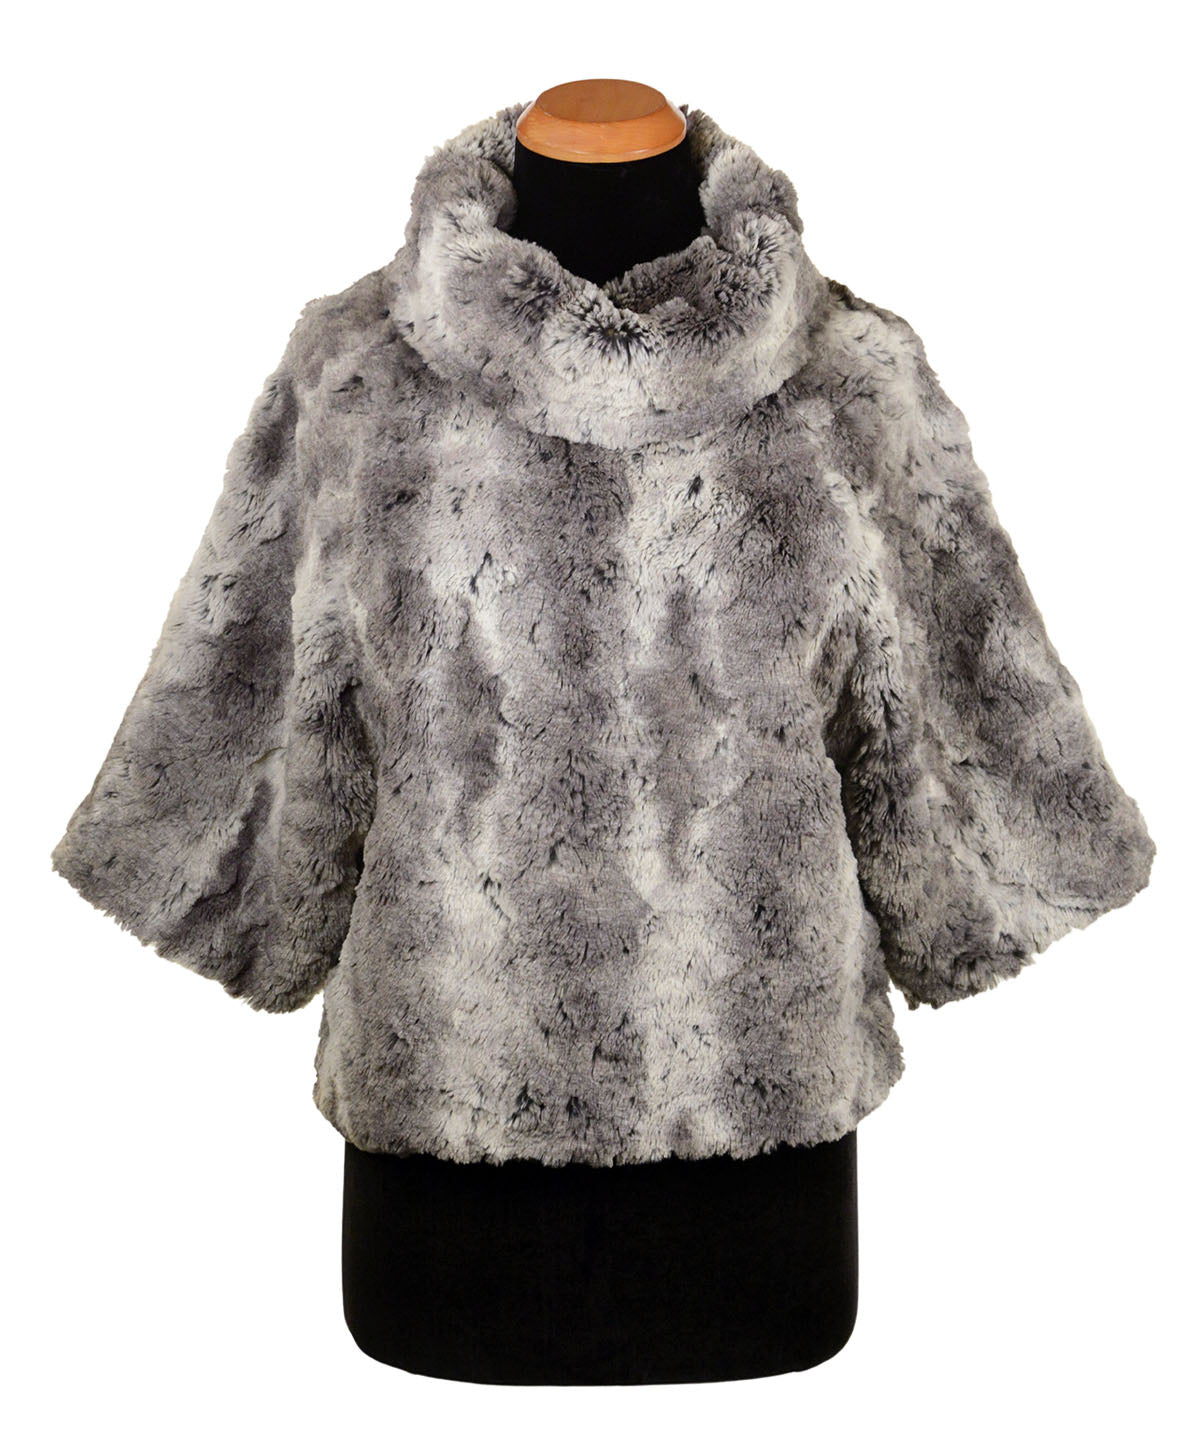 Sweater Top with Cowl Neck in Seattle Sky Faux Fur. Extended length of 4&quot;. Handmade in Seattle, WA, USA by Pandemonium Seattle.